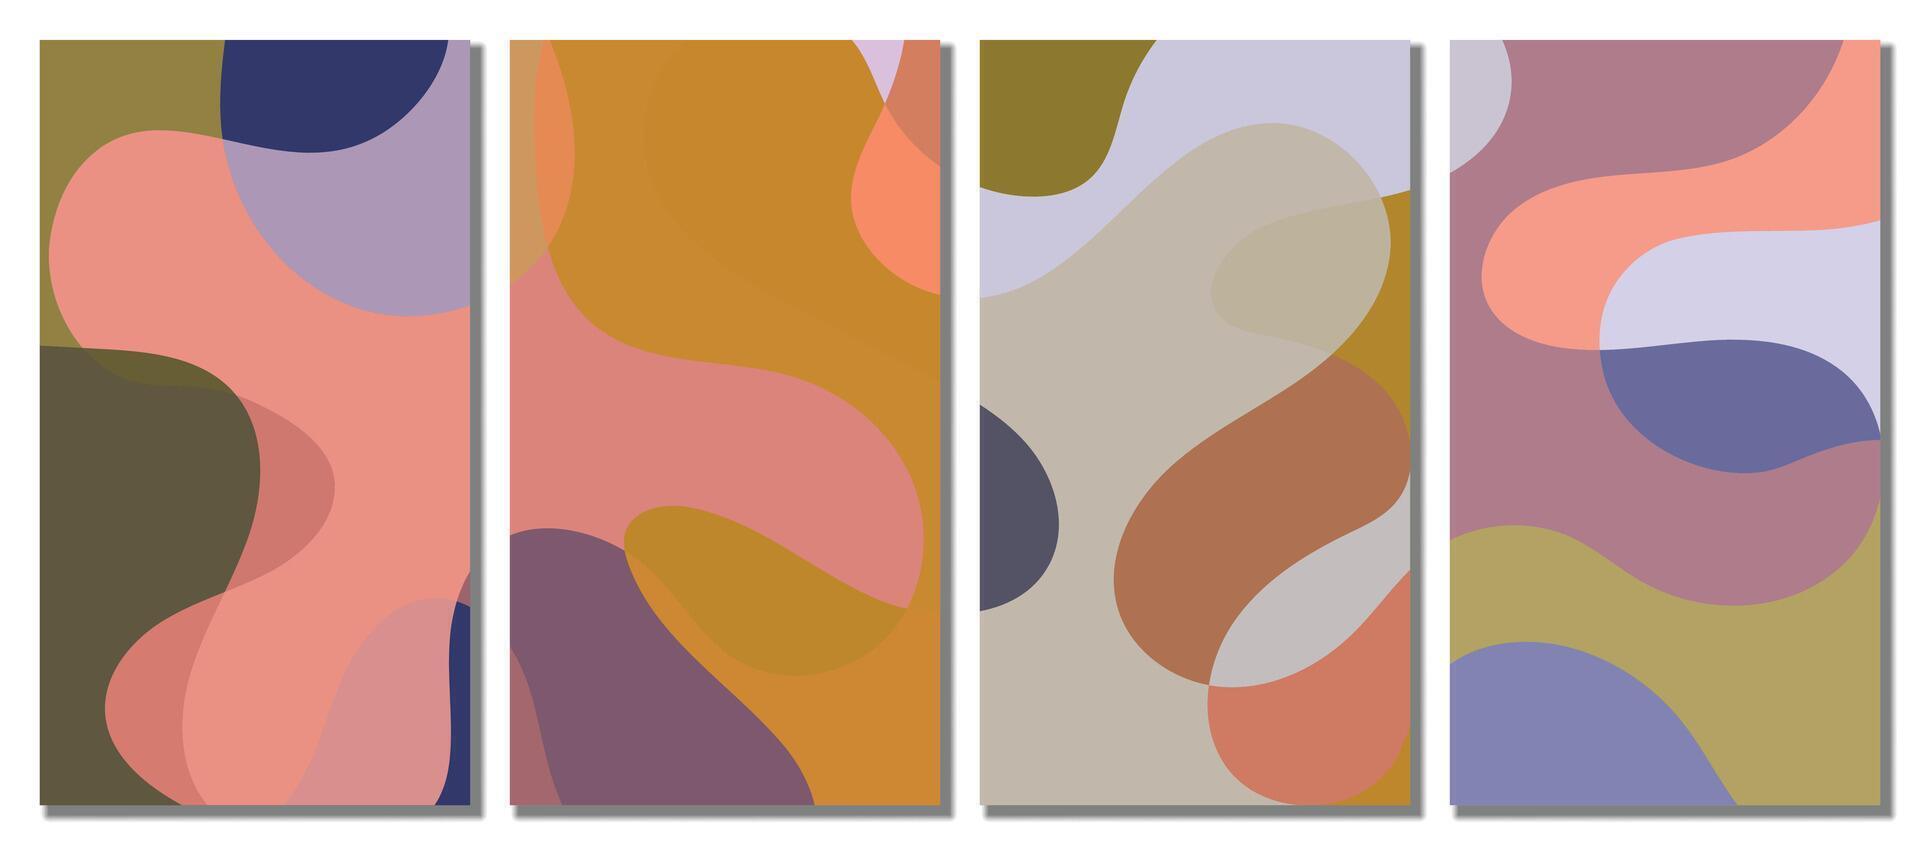 abstract golvend reeks achtergrond. vector